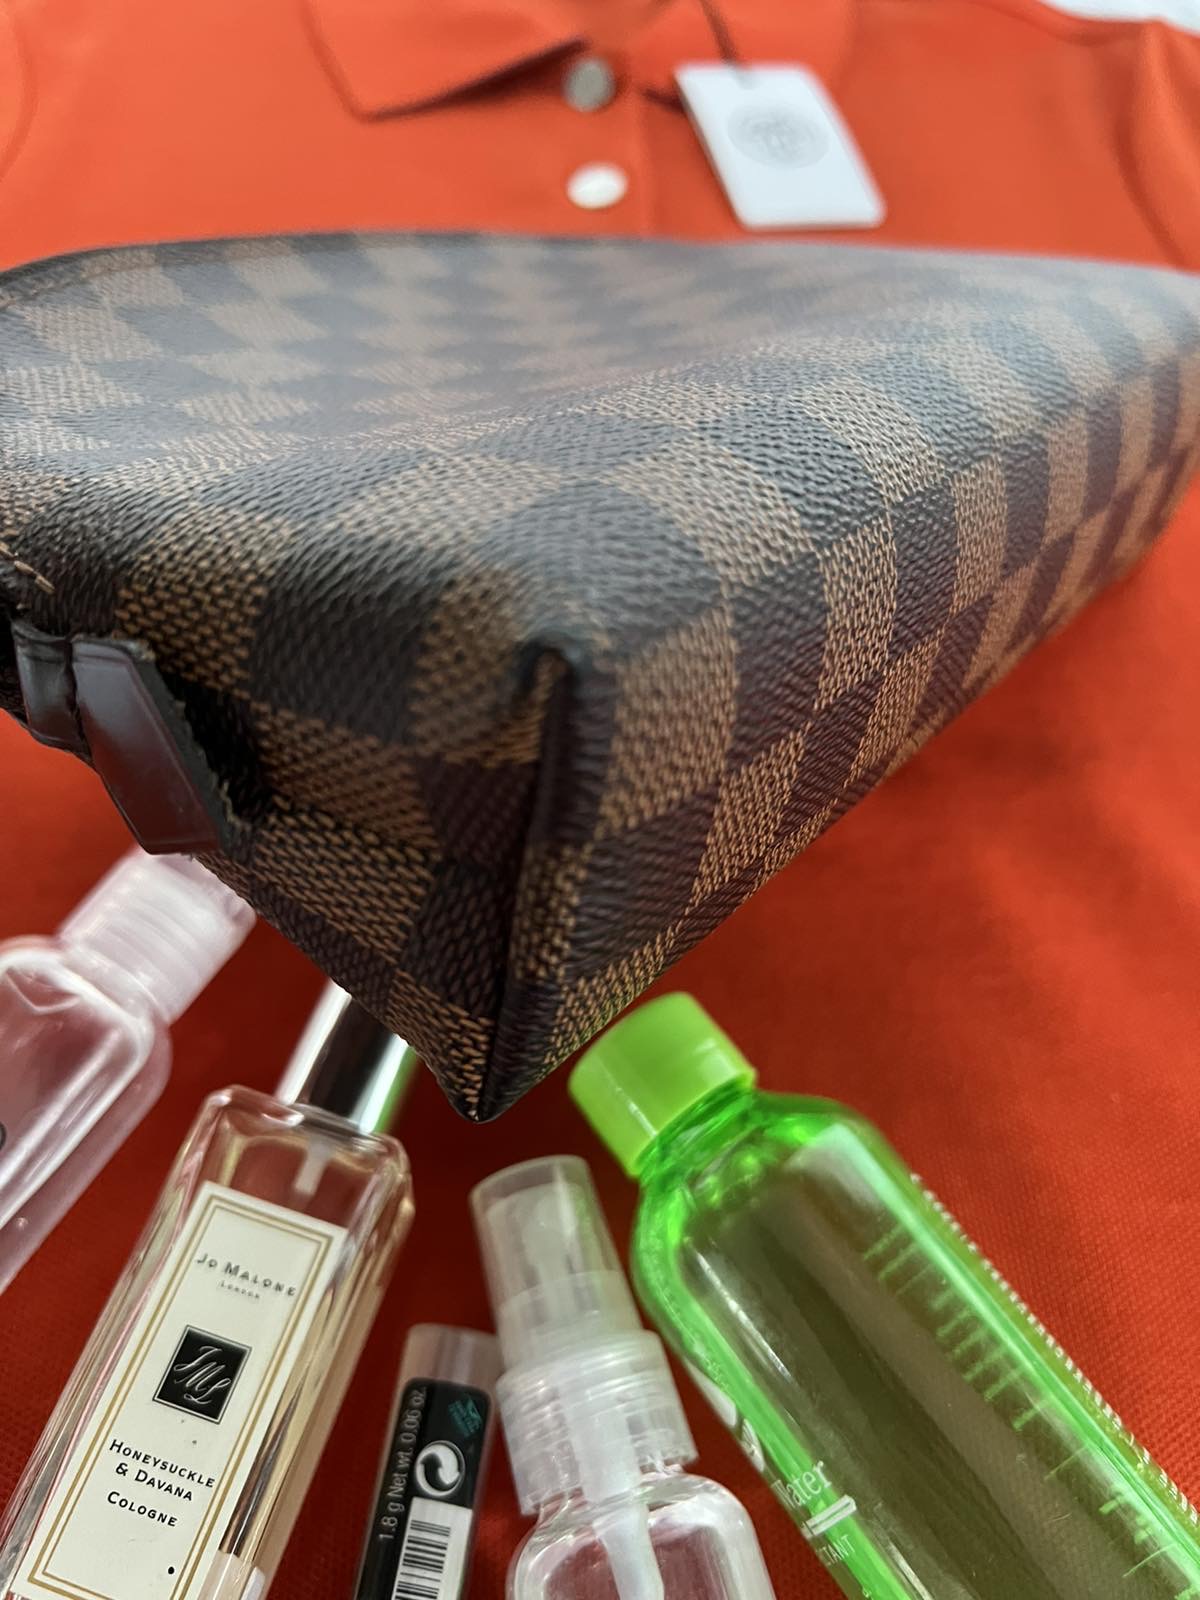 SOLD/LAYAWAY💕 Louis Vuitton Damier Ebene Cosmetic Pouch GM. Made in  France. No inclusions ❤️ - Canon E-Bags Prime